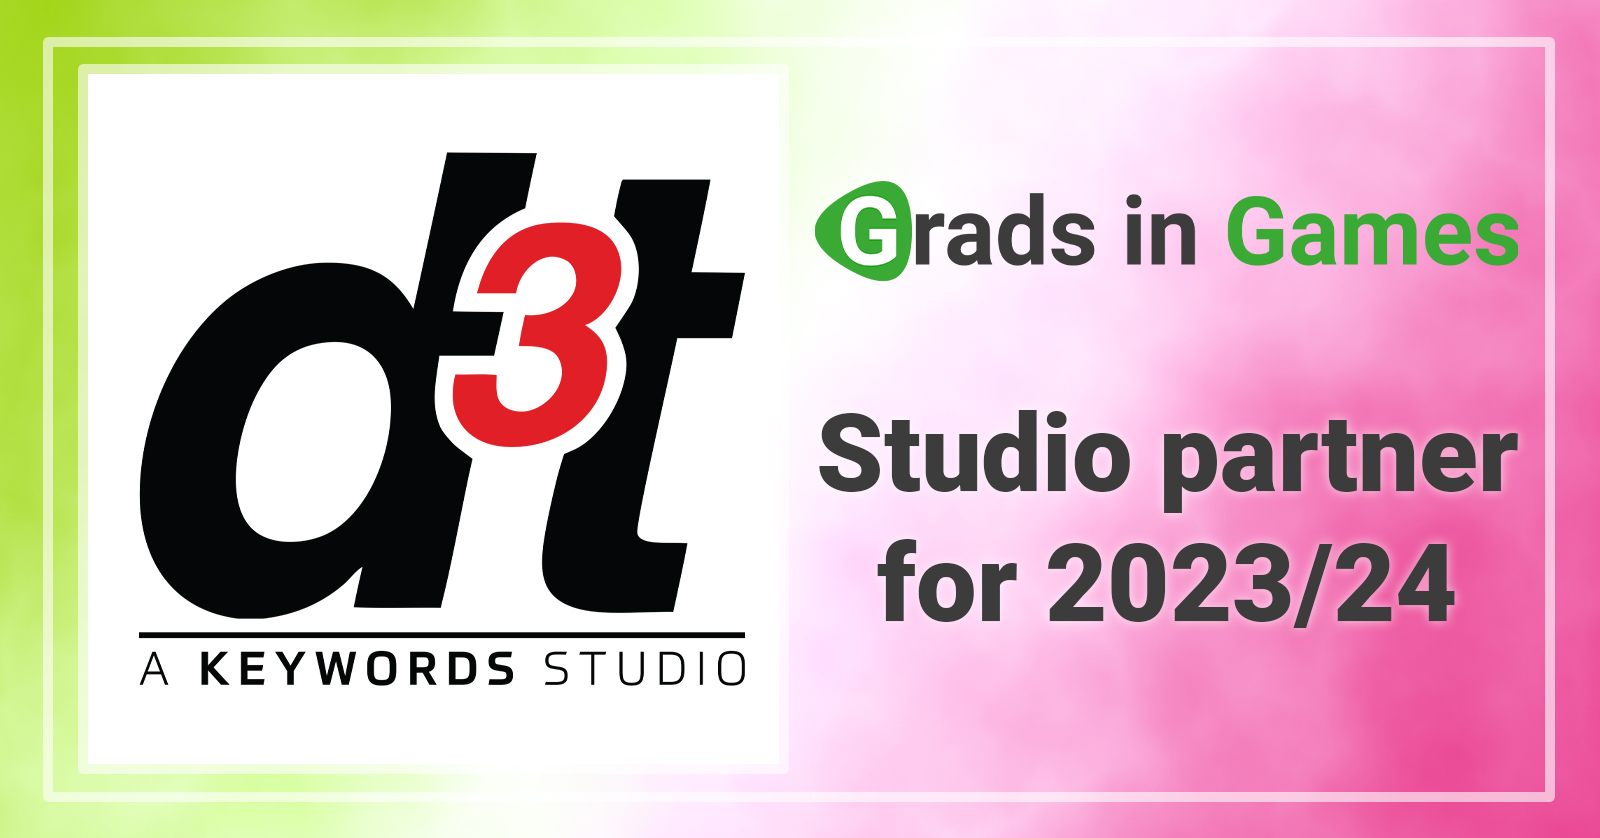 We're thrilled to welcome back d3t as studio partner!